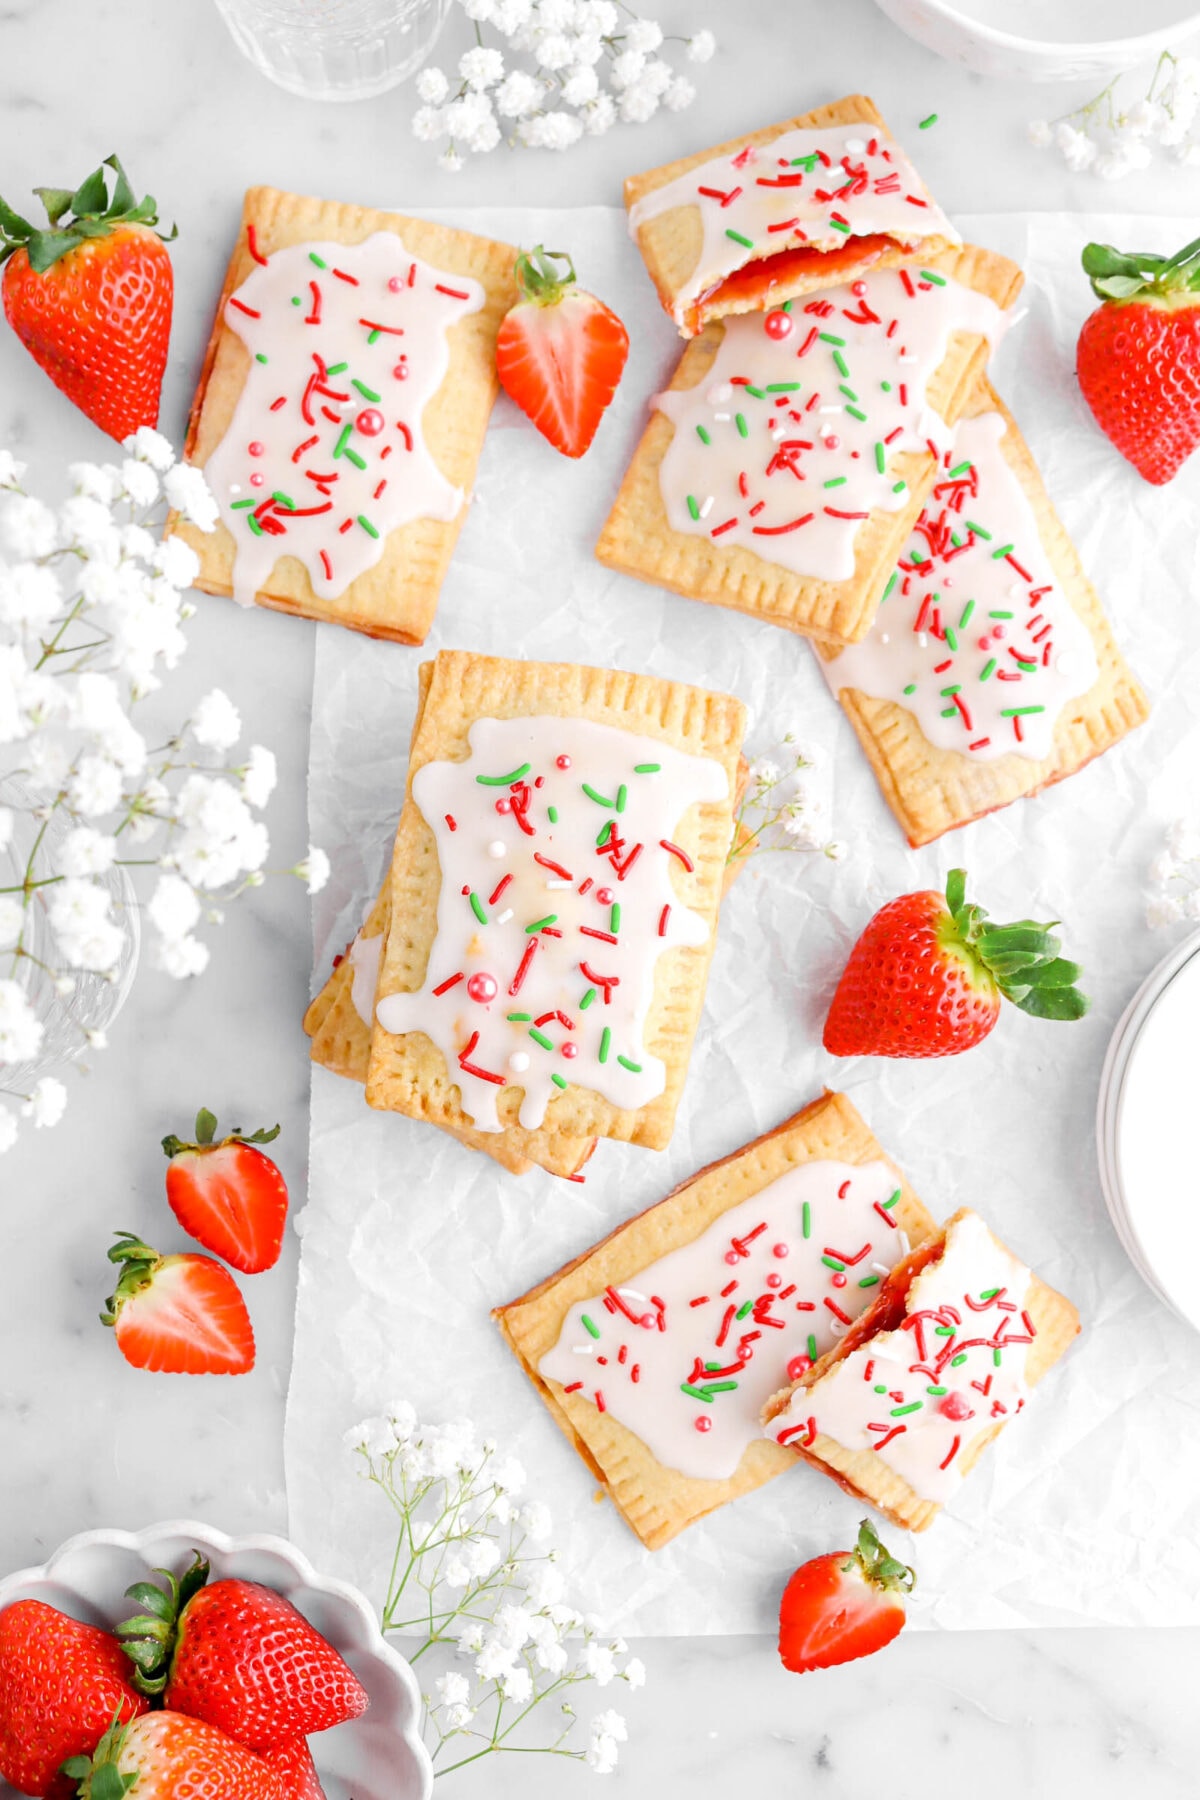 eight iced strawberry pop tarts on parchment paper with one pop tart broken in half and propped against other pop tarts to expose the jam filling.